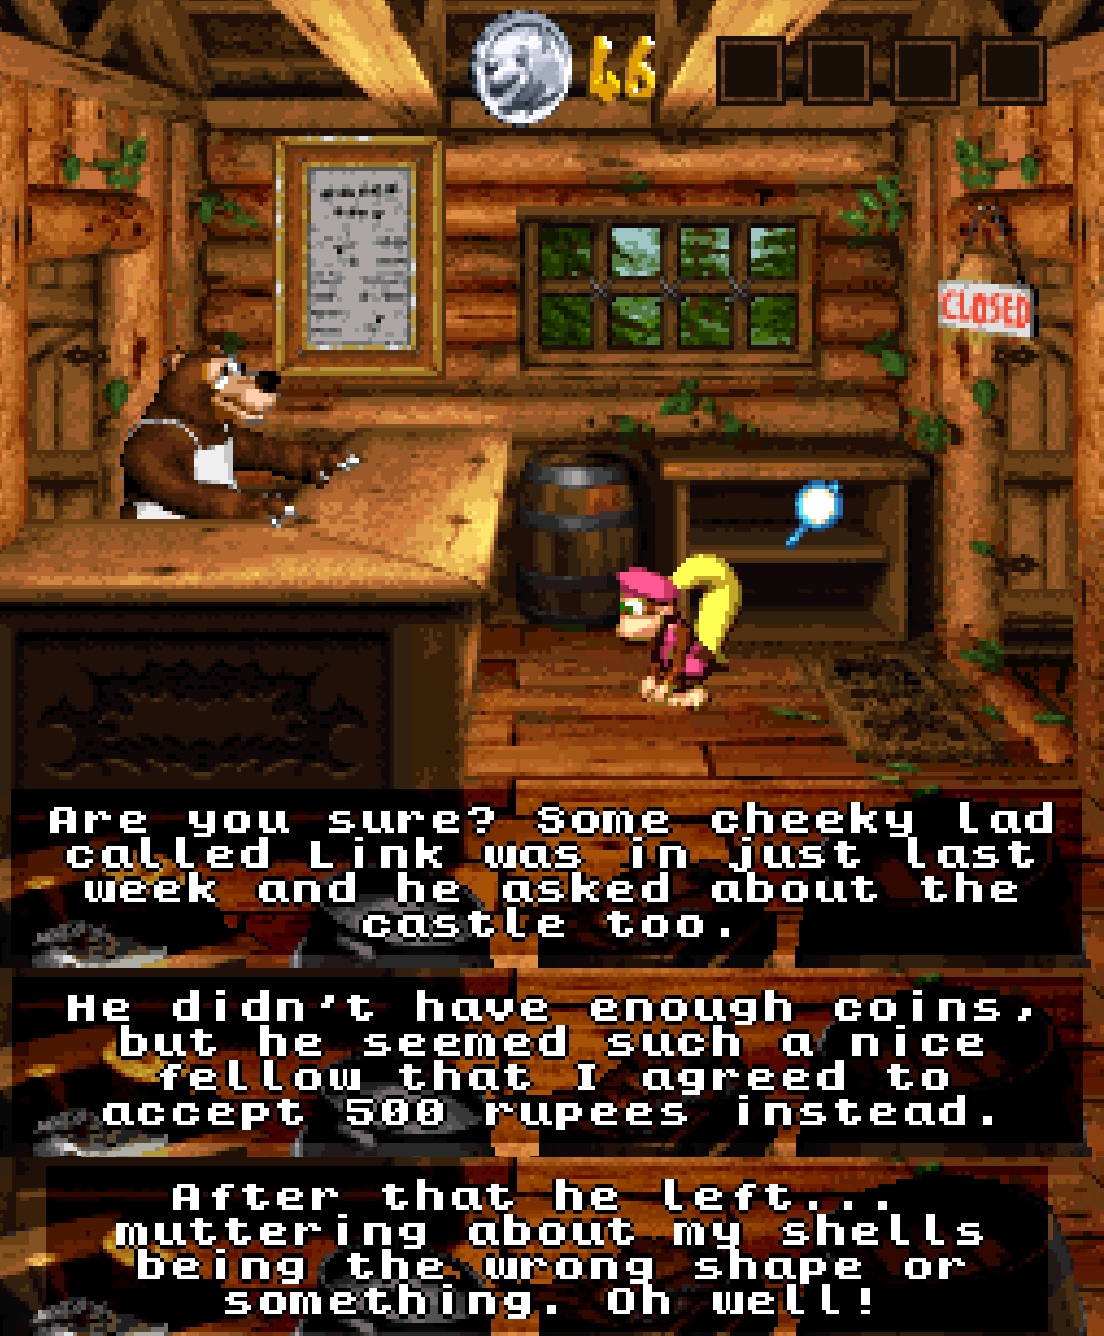 donkey kong - Closel Are you sure? some cheeky Lad called Link was in just last week and he asked about the castle too. He didn't have enough coins but he seemed such a nice fellow that I agreed to accept 500 rupees instead. After that he left, muttering 